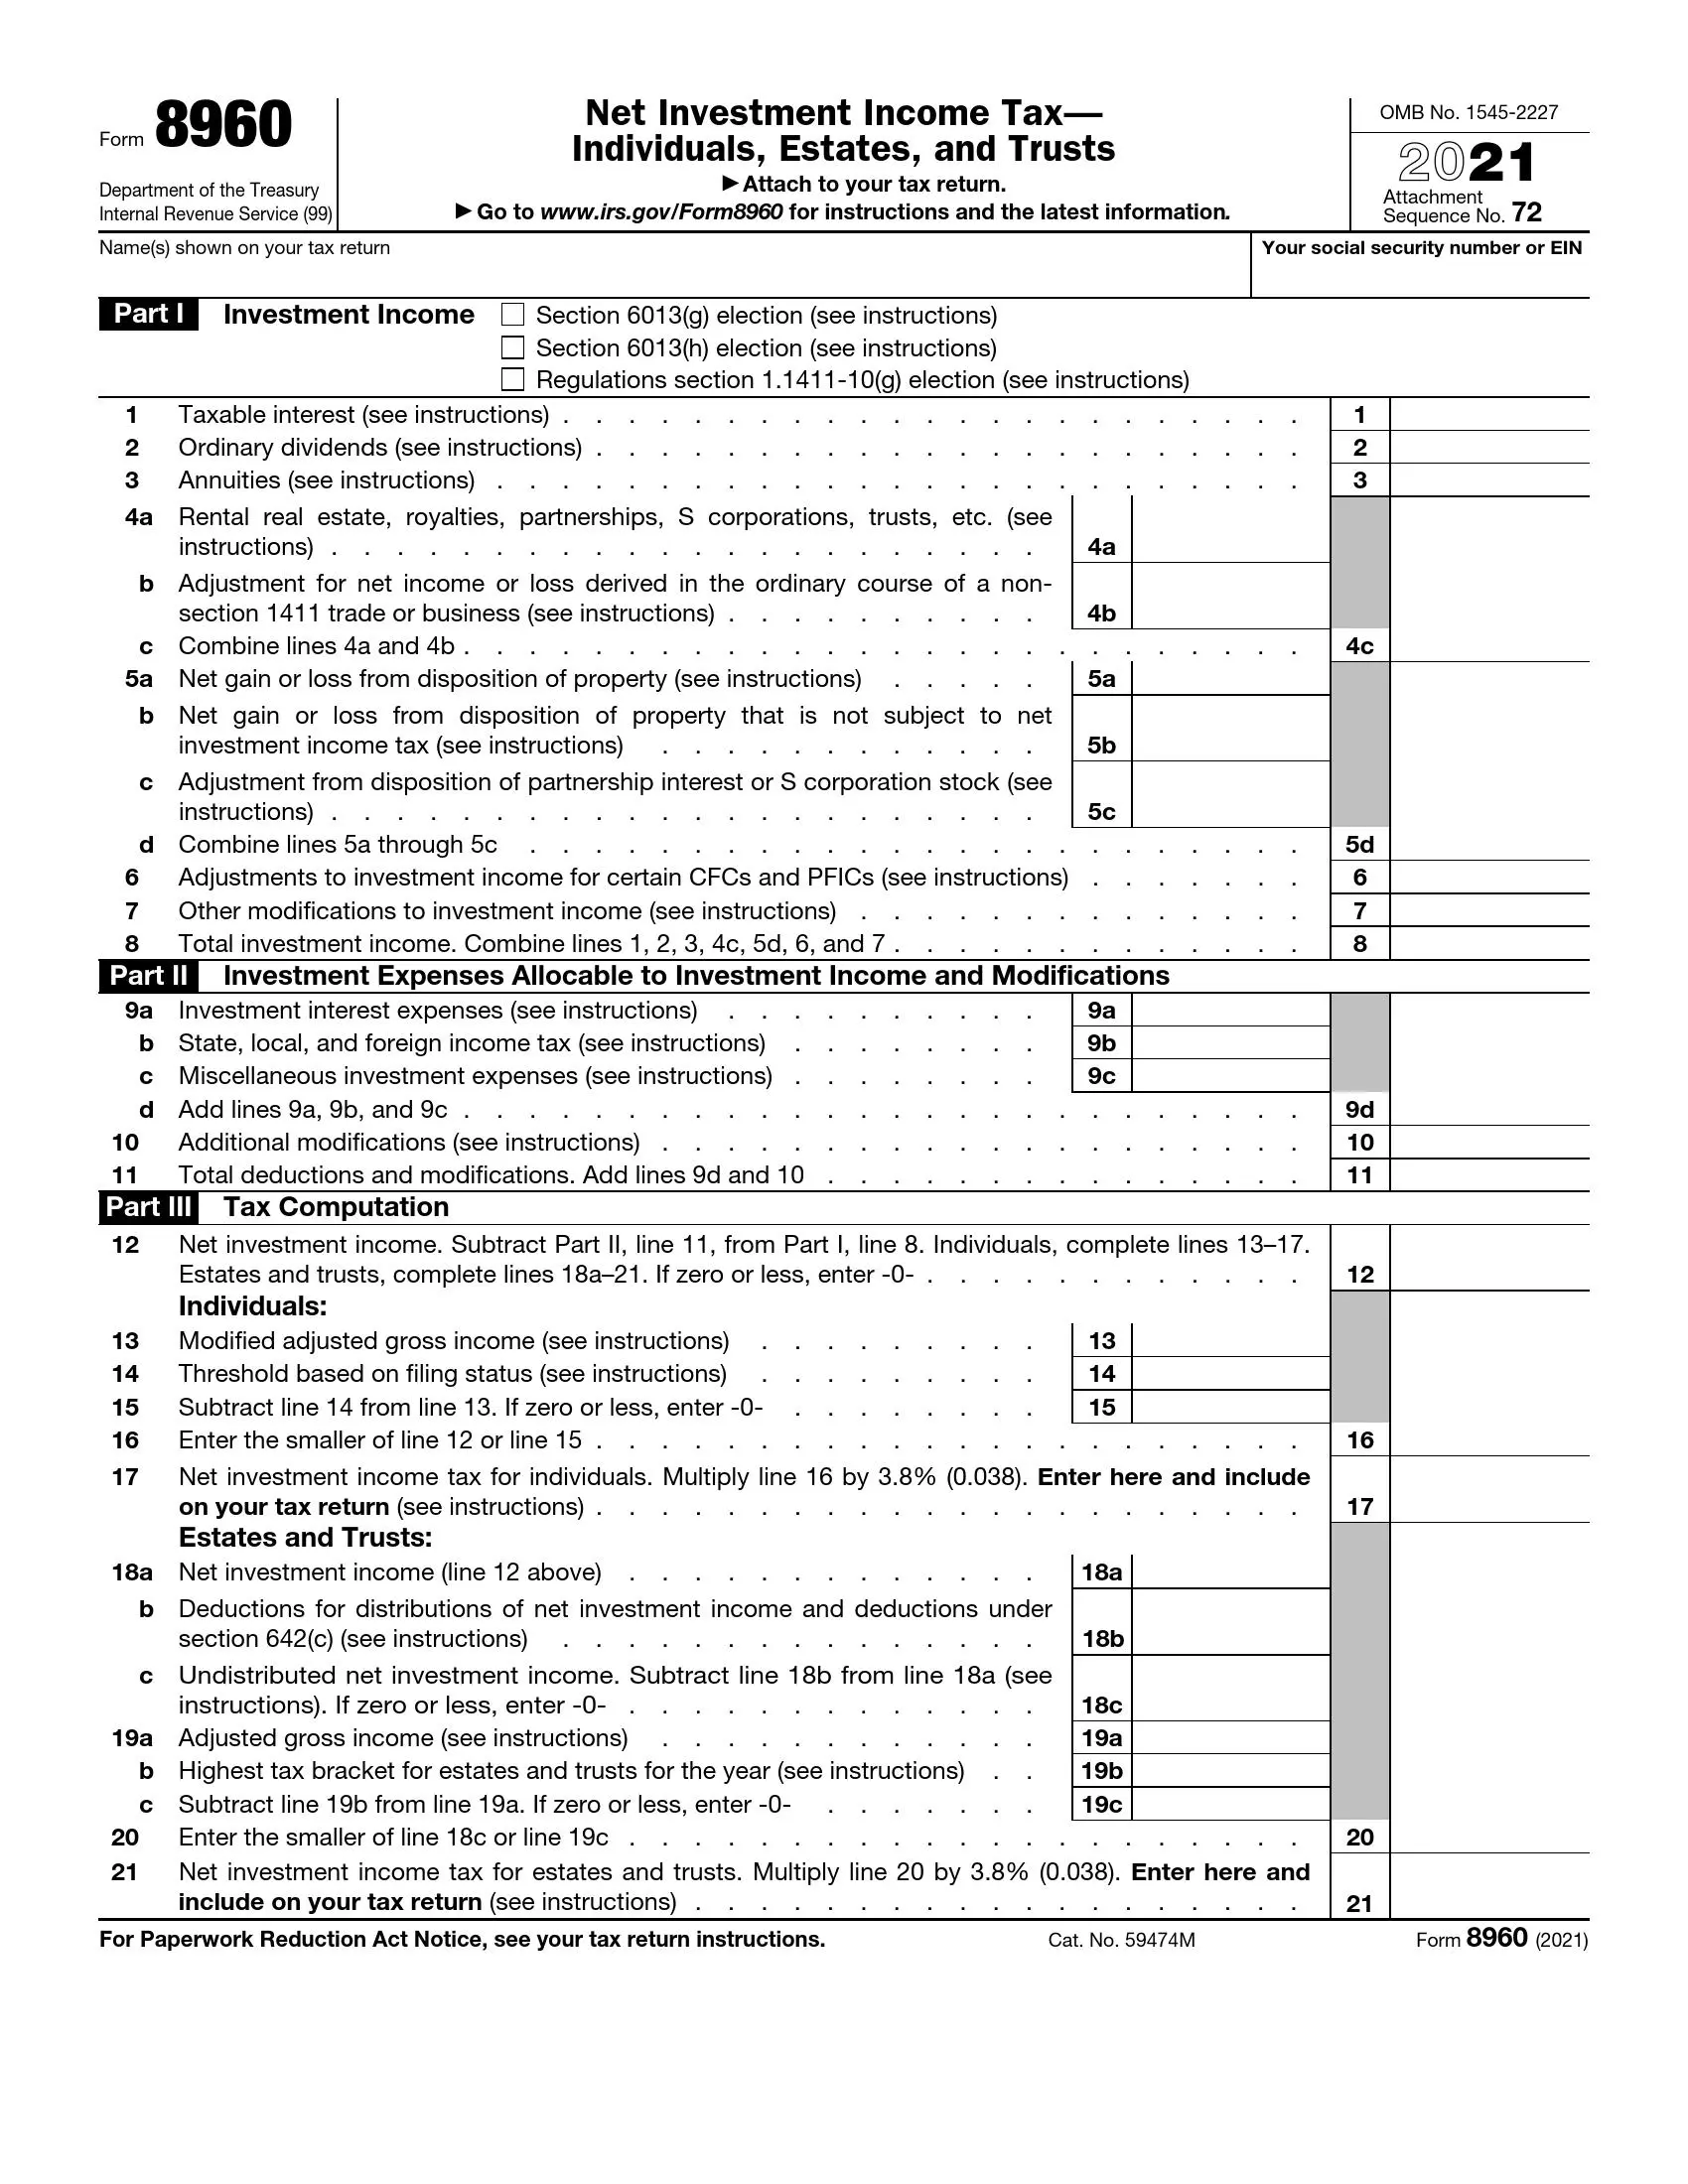 irs form 8960 2021 preview